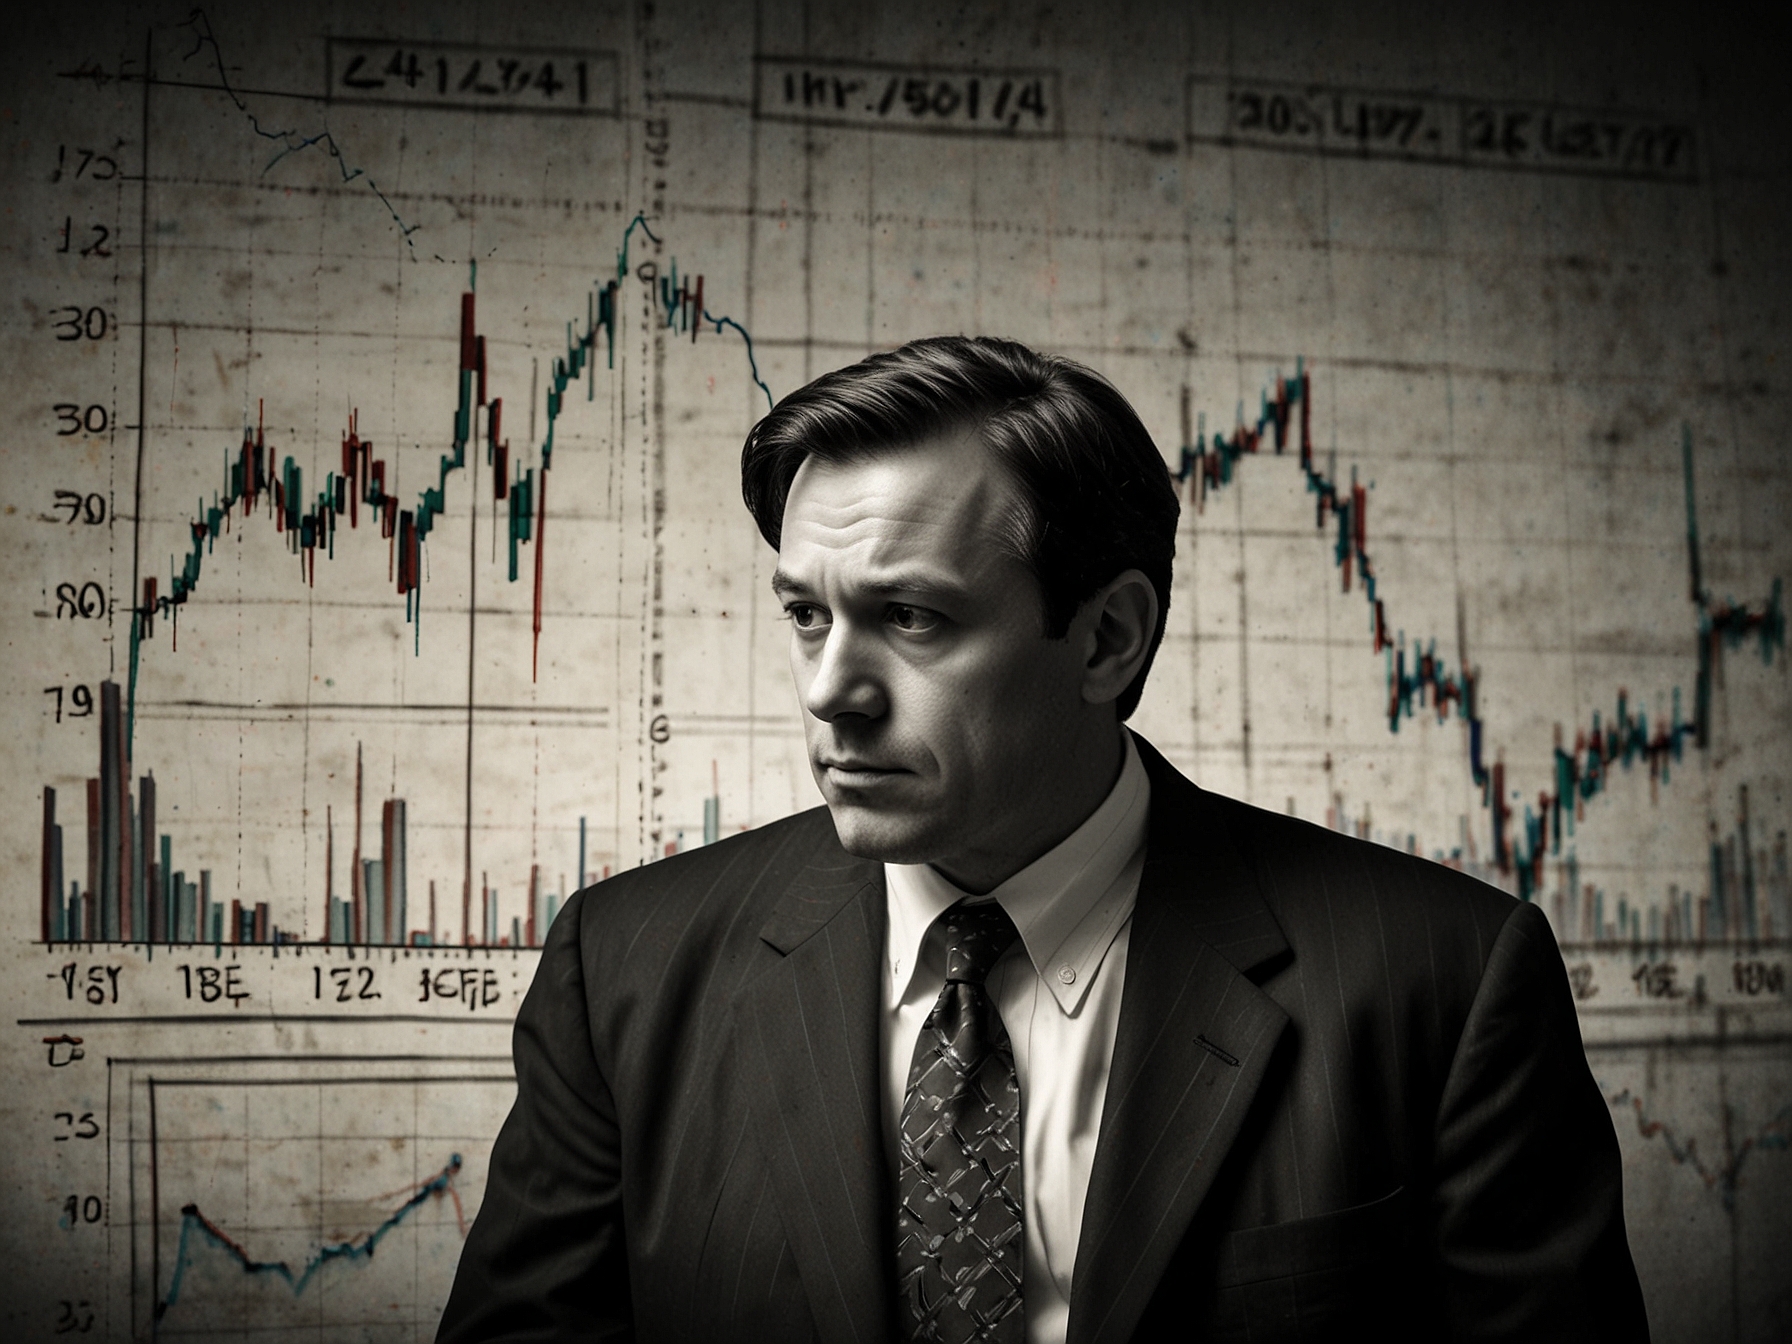 An investor looking concernedly at a stock market graph showing a sharp decline, symbolizing the financial instability and poor stock performance of XYZ Corp.